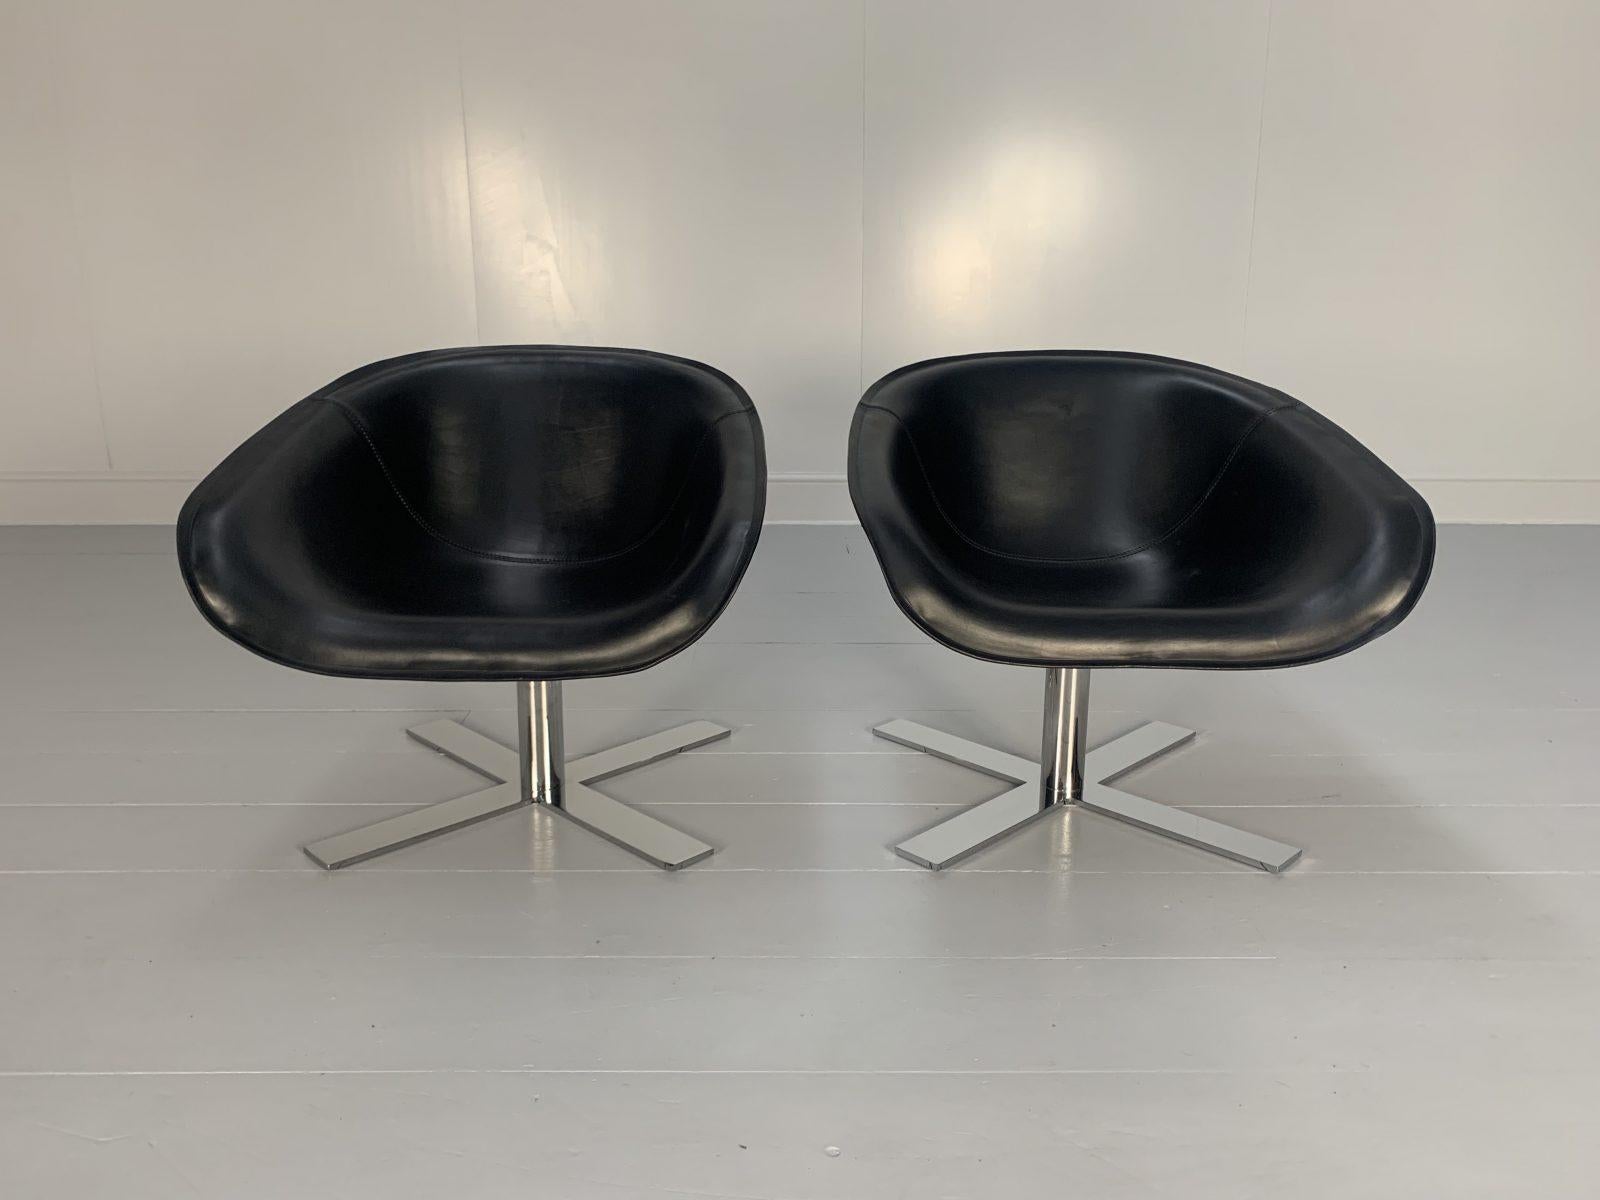 Pair of B&B Italia “Mart” Swivel Armchairs in Black “Pelle” Leather and Metal In Good Condition For Sale In Barrowford, GB